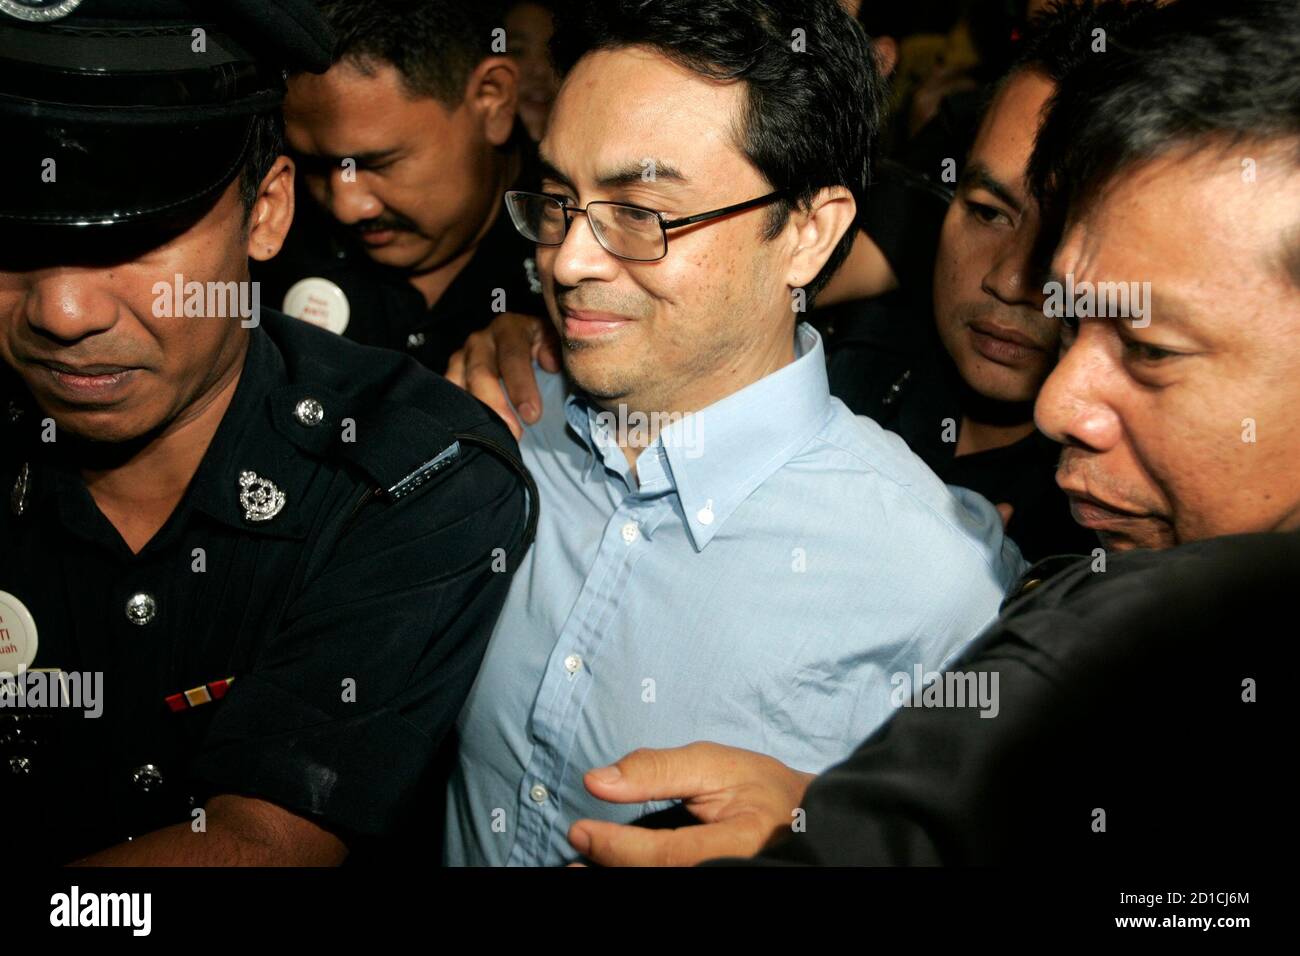 Abdul Razak Abdullah Baginda is escorted by police as he arrives at a courthouse in Shah Alam outside Kuala Lumpur June 4, 2007. Malaysia postponed on Monday the trial of a prominent political analyst accused of involvement in the murder of a Mongolian model, Altantuya Shaariibuu, feeding months of frenzied speculation about government links to the case.   REUTERS/Zainal Abd Halim (MALAYSIA) Stock Photo